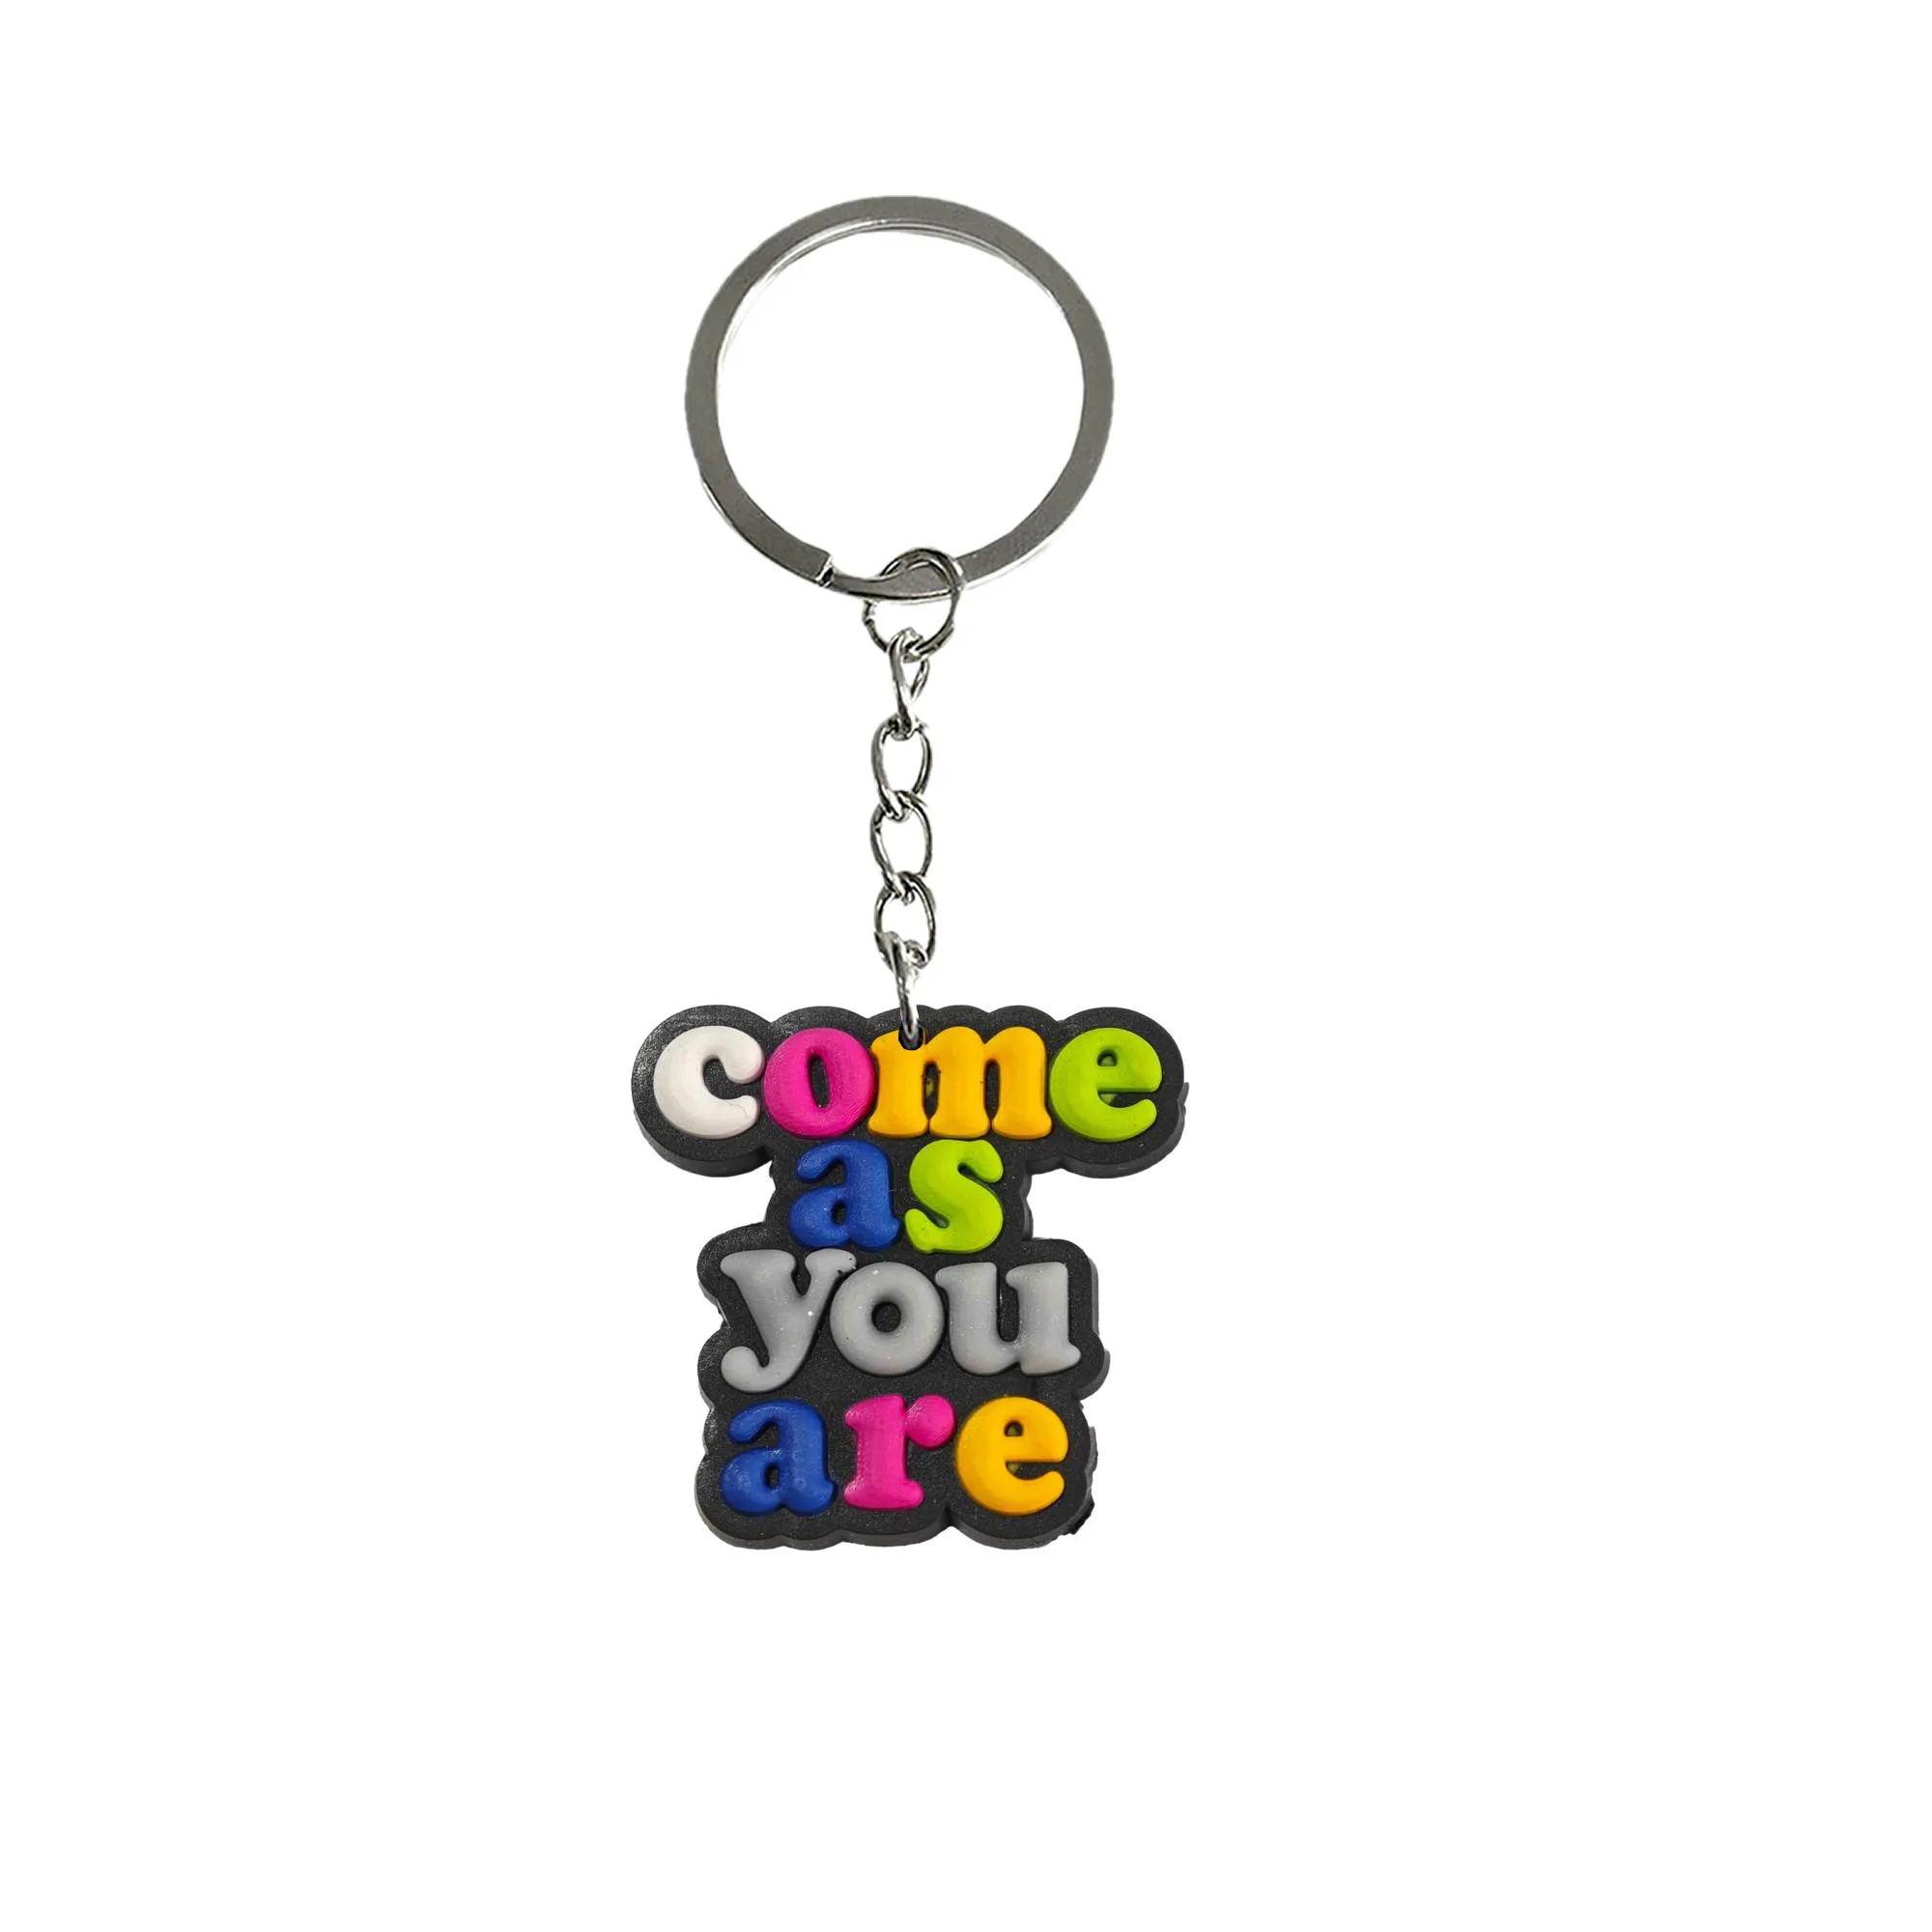 rainbow 24 keychain key purse handbag charms for women car bag keyring chain accessories backpack and gift valentines day suitable schoolbag keychains pendant bags